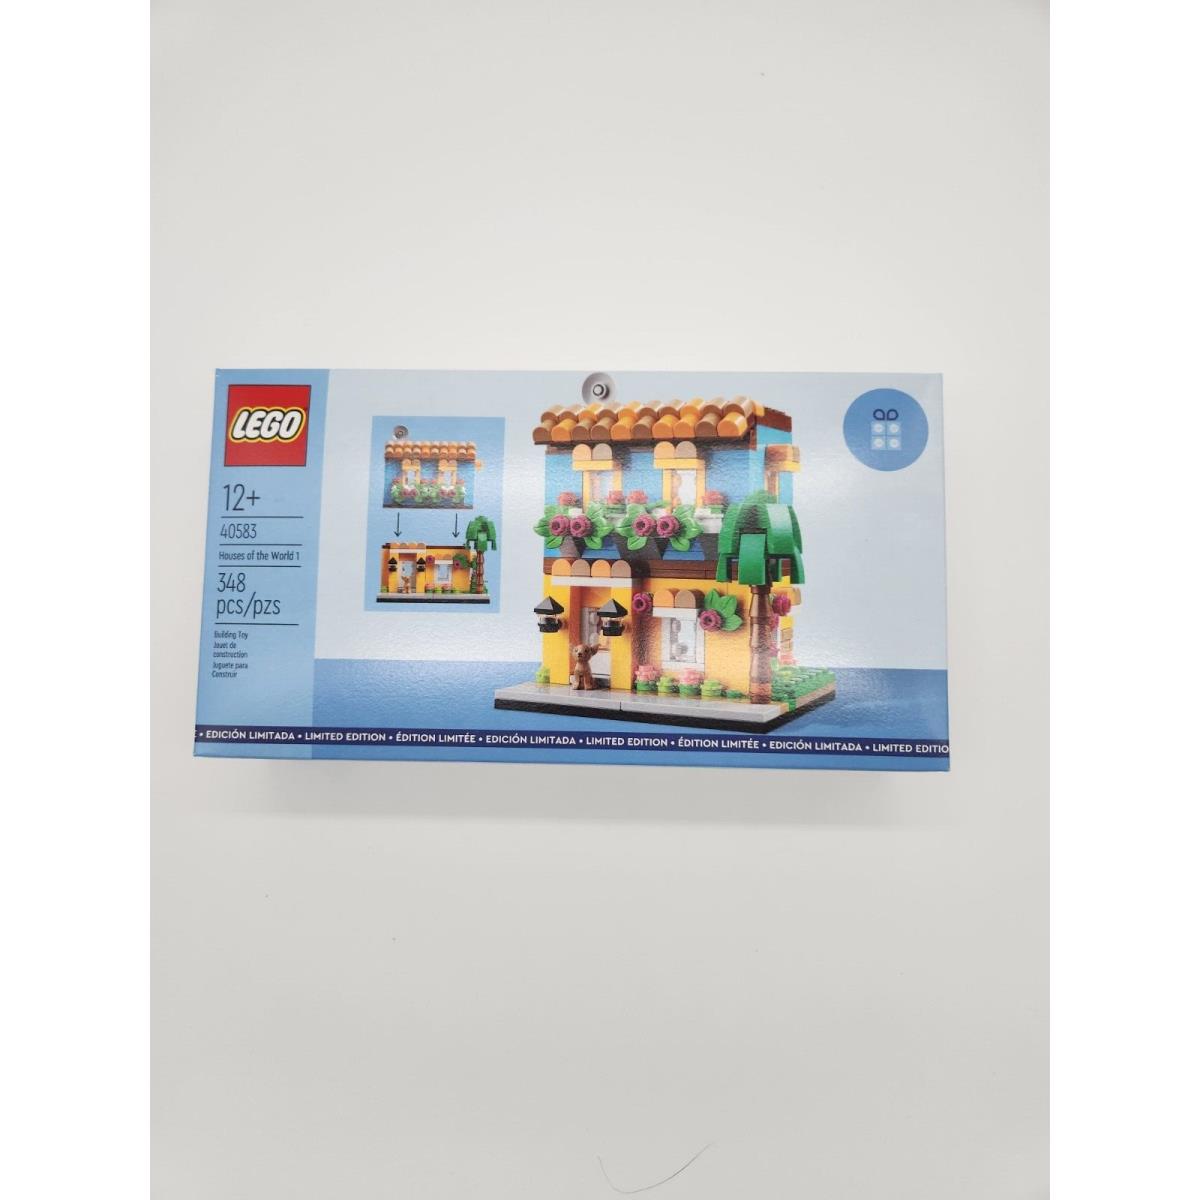 Lego - Houses of The World 1 - 40583 - Retired - Limited Edition Gwp- New/sealed